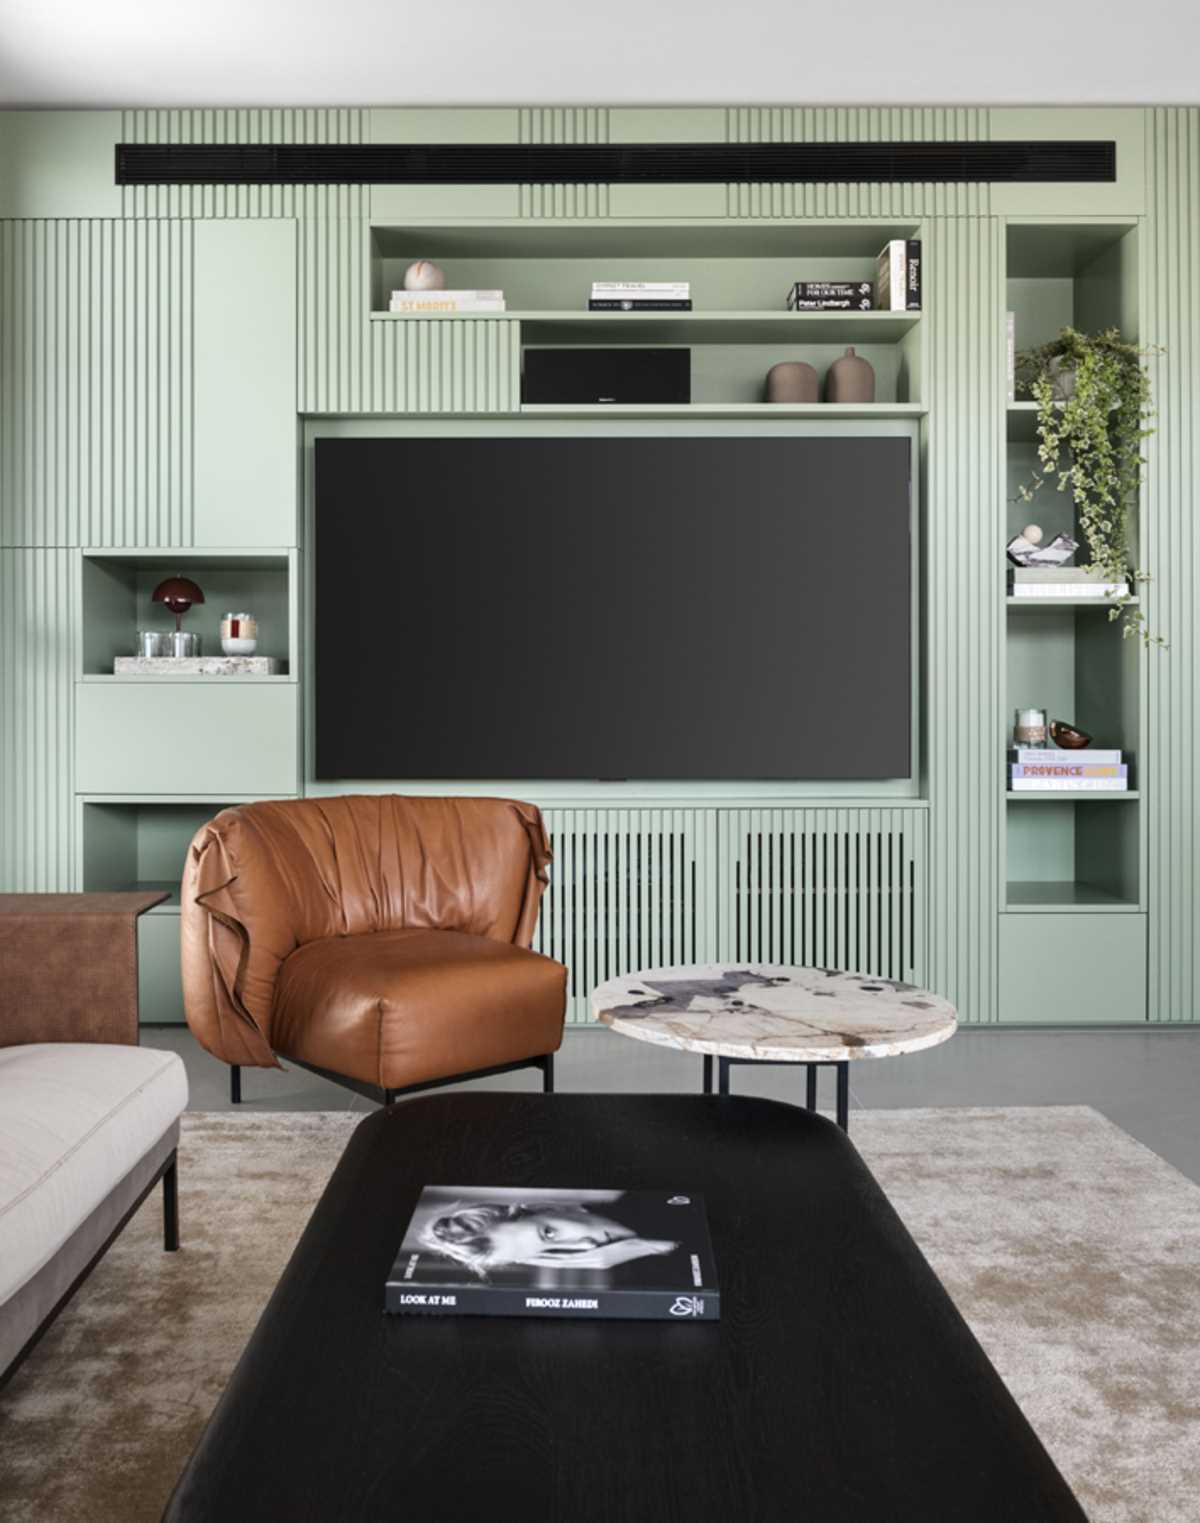 This matte light green living room accent wall includes hidden storage as well as open shelving, allowing electronics, decor, and plants to be displayed.